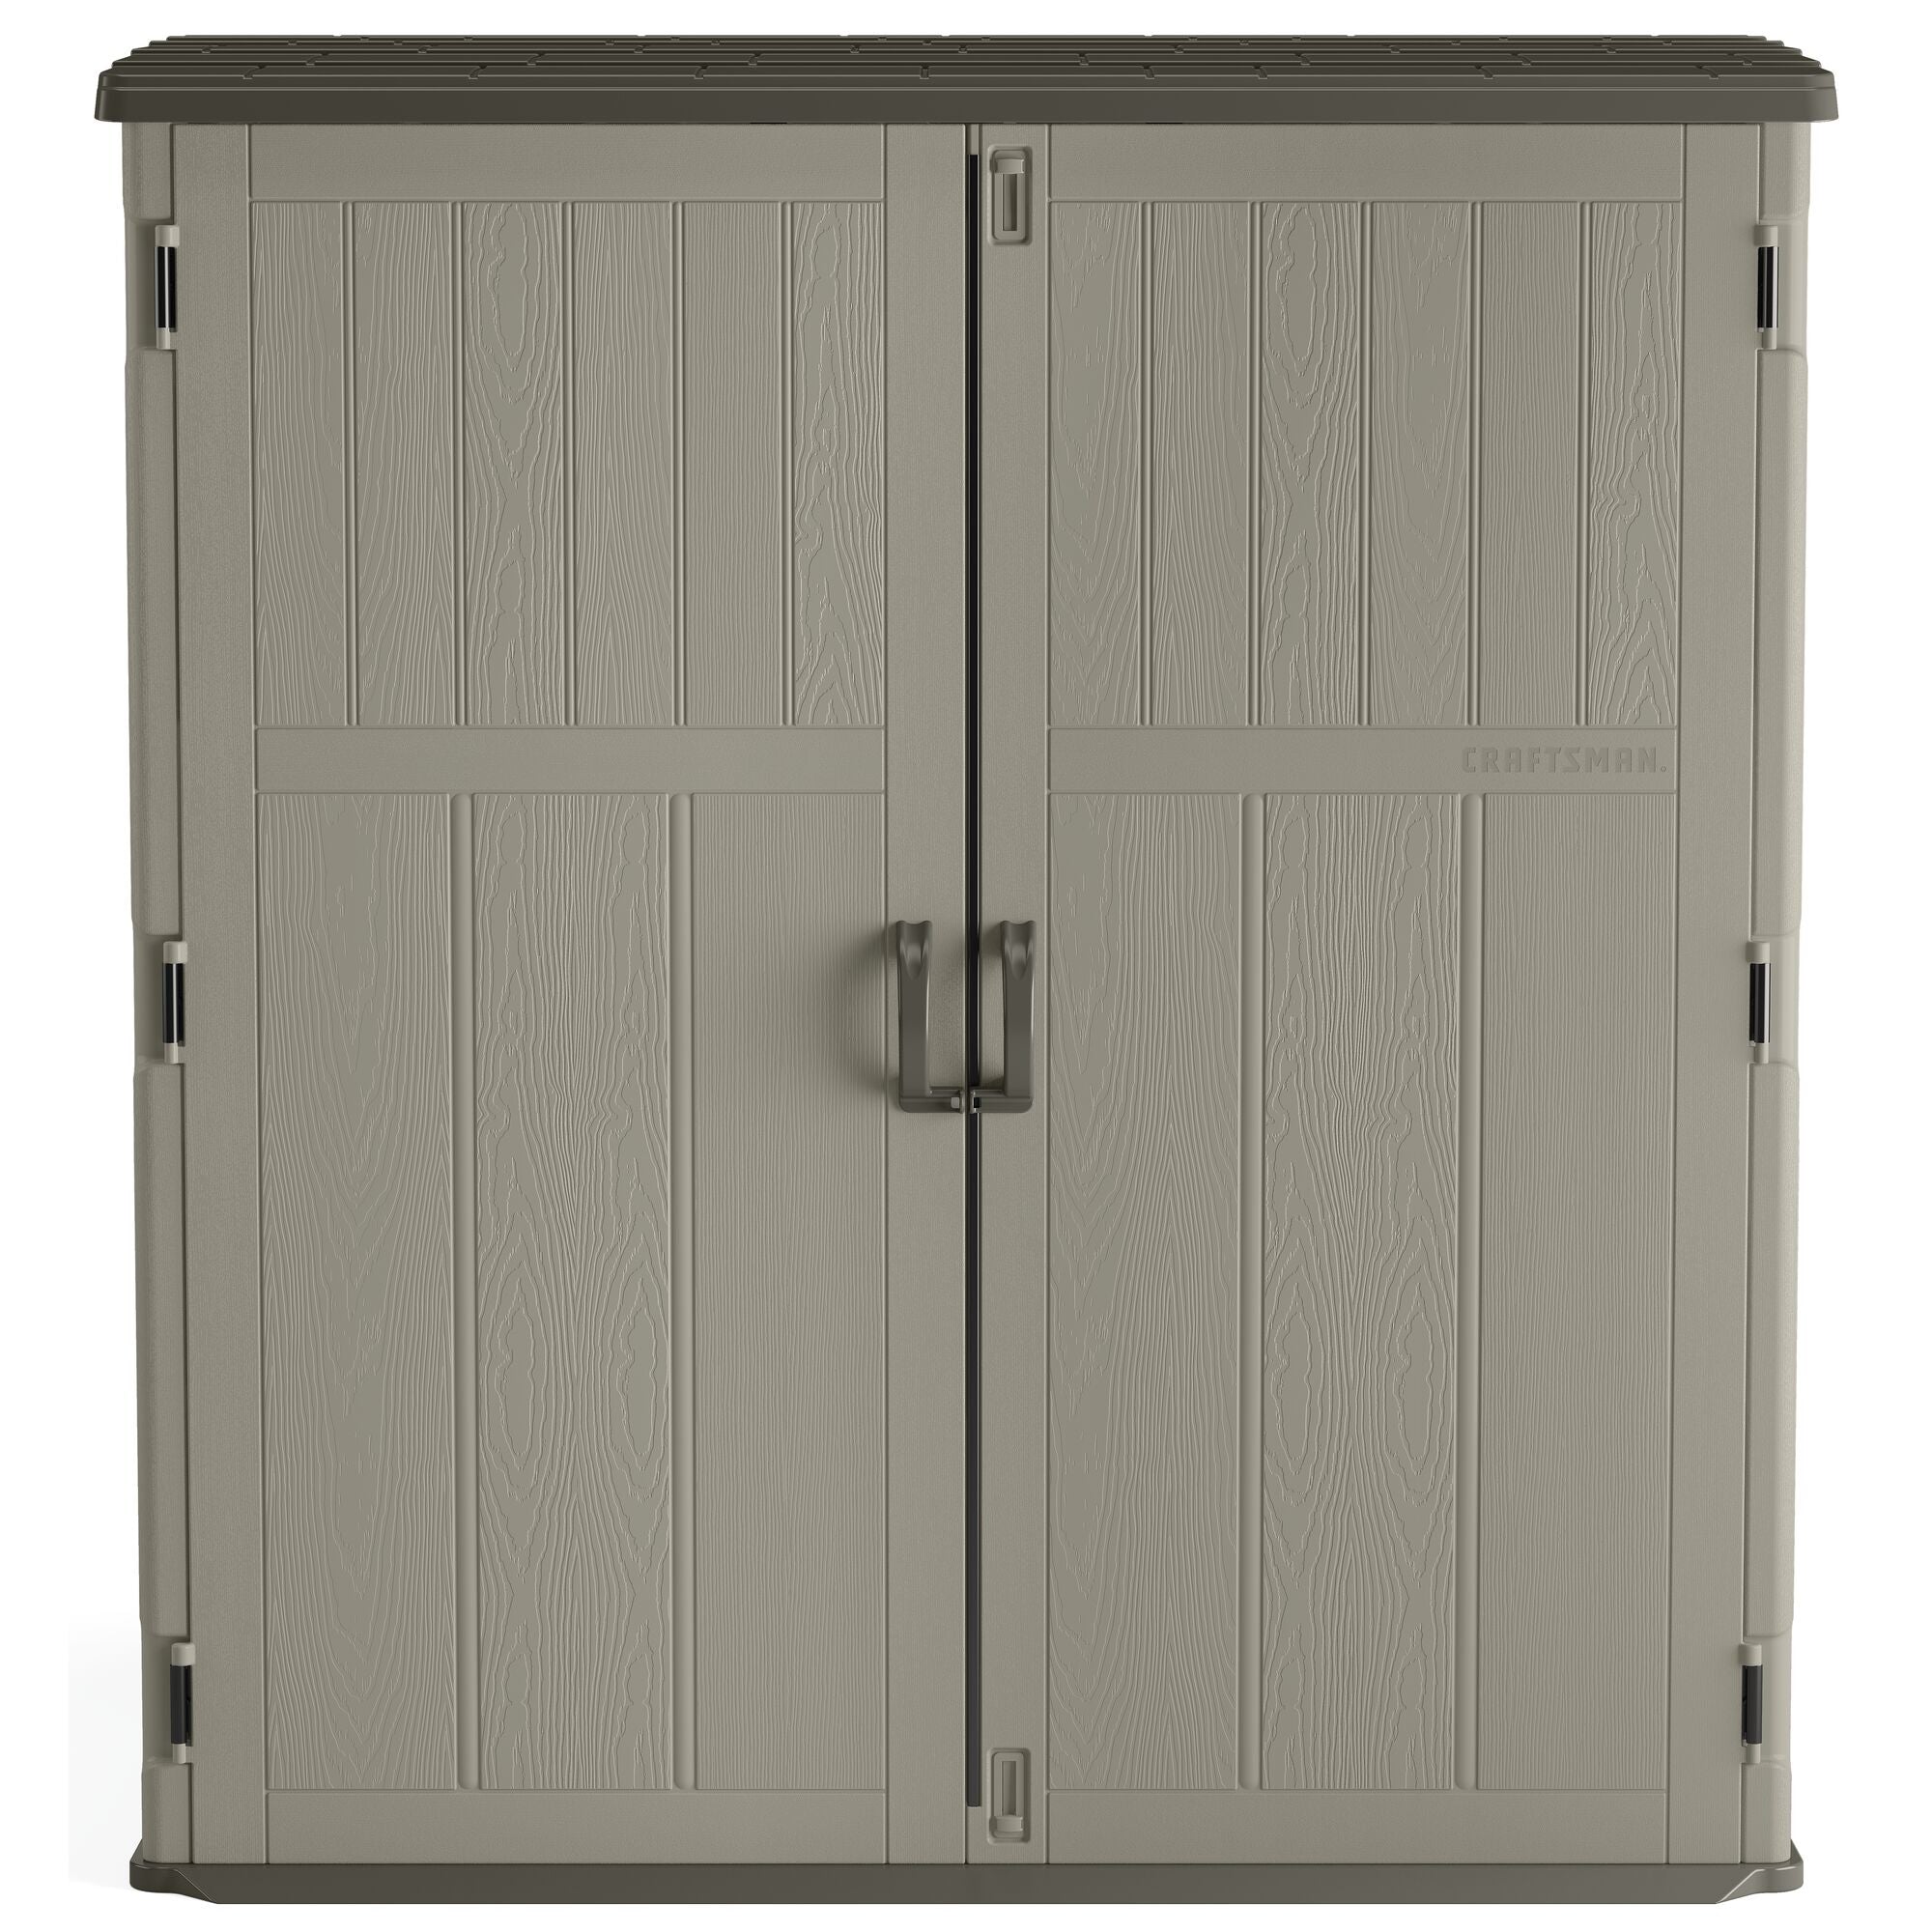 Extra large vertical storage shed.